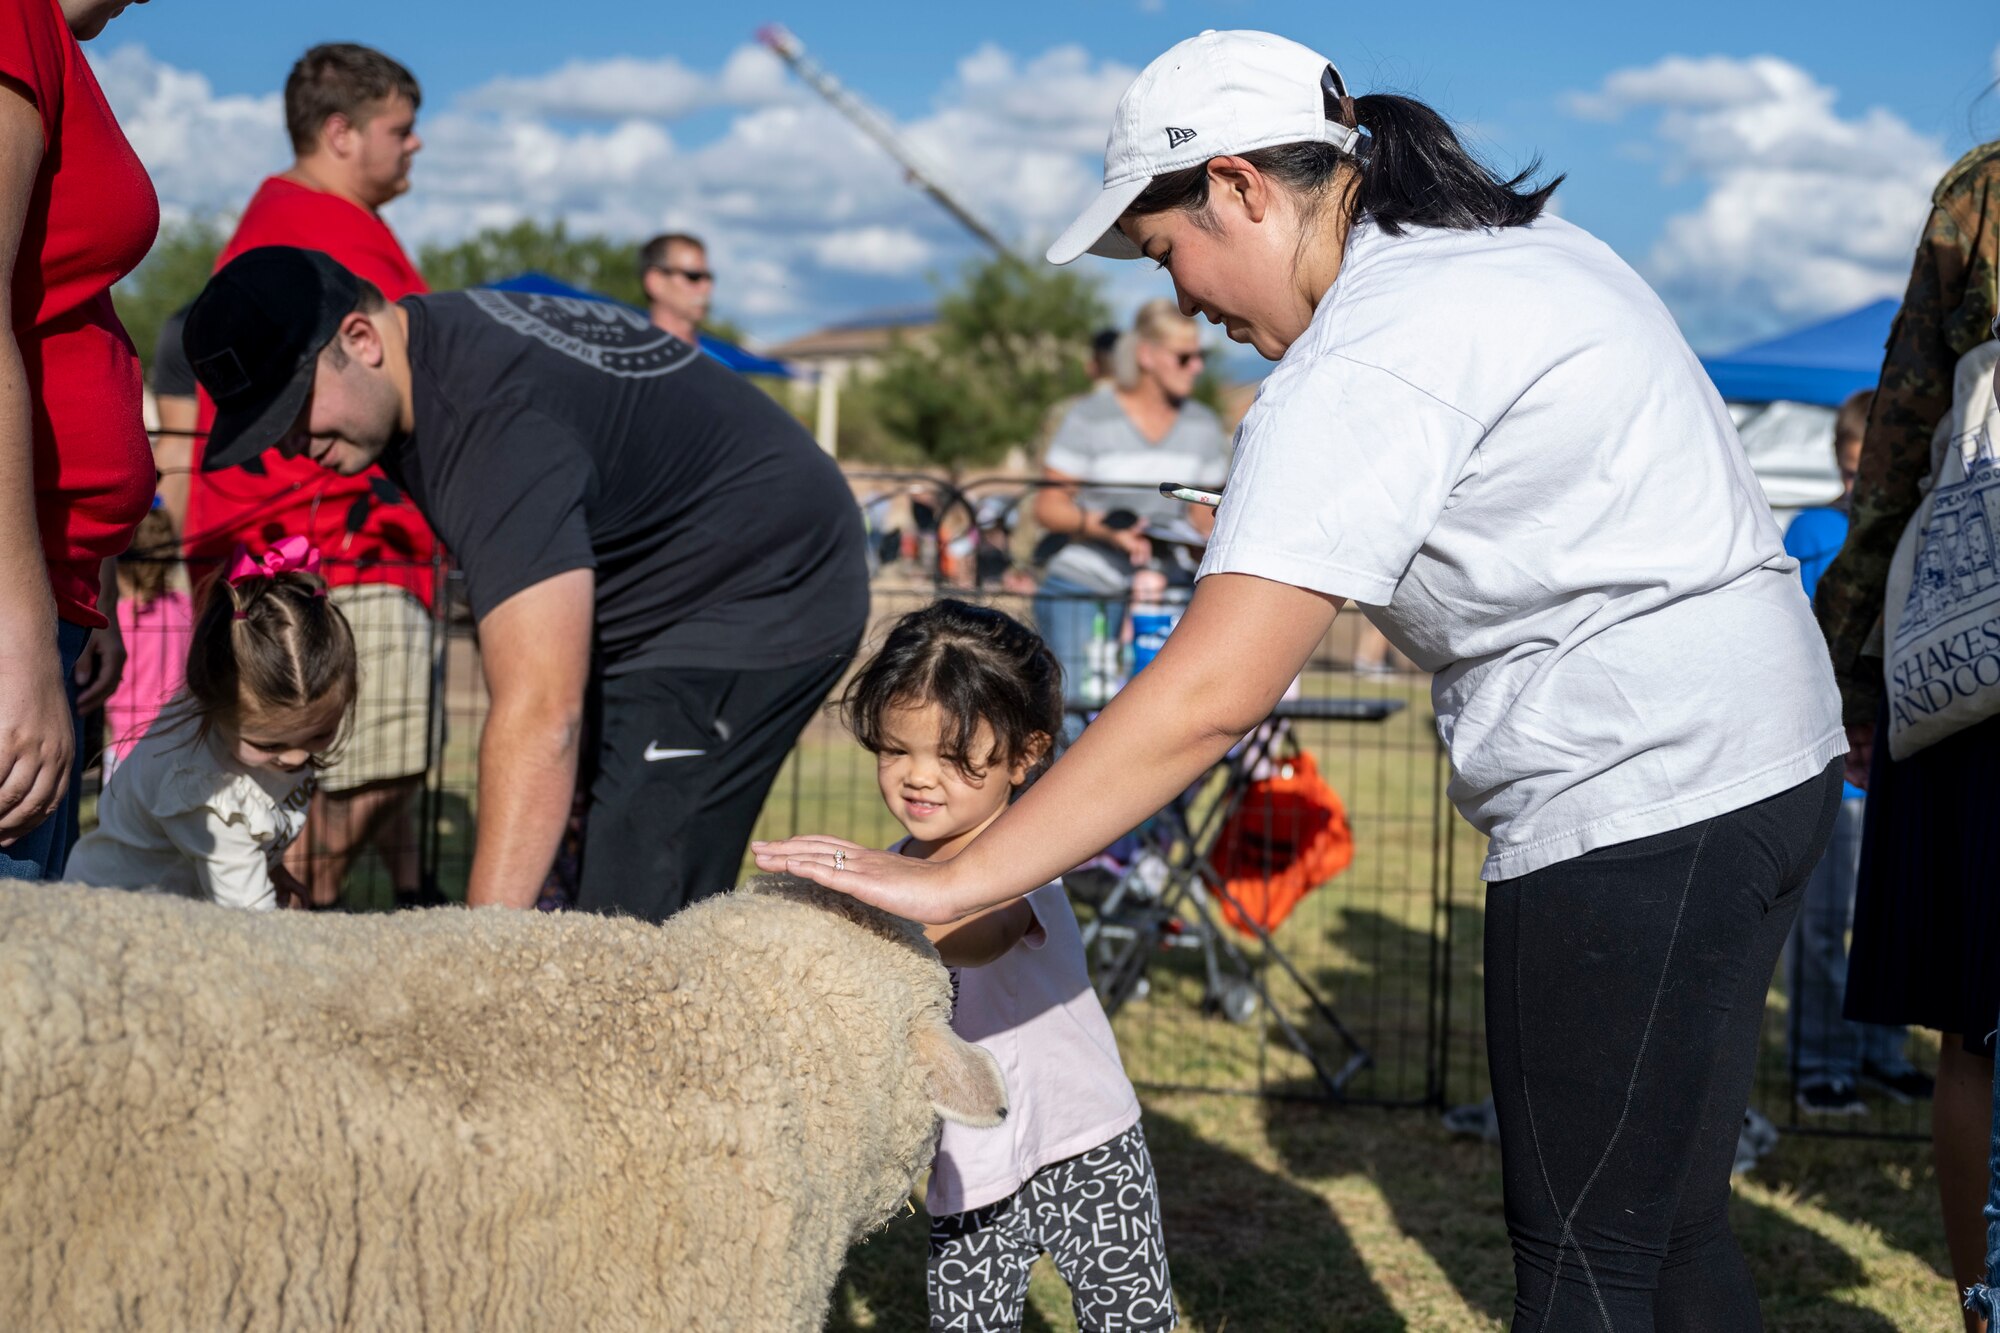 Mia and Sachiko Baudo, Soaring Heights residents, pet a sheep in the petting zoo Oct. 1, 2021 on Holloman Air Force Base, N.M. National Night Out offered individuals with base access a variety of activities to participate in including free food, a bounce house and various displays of local and 49th Wing law enforcement and first responders. (U.S. Air Force photo by Senior Airman Kristin Weathersby)